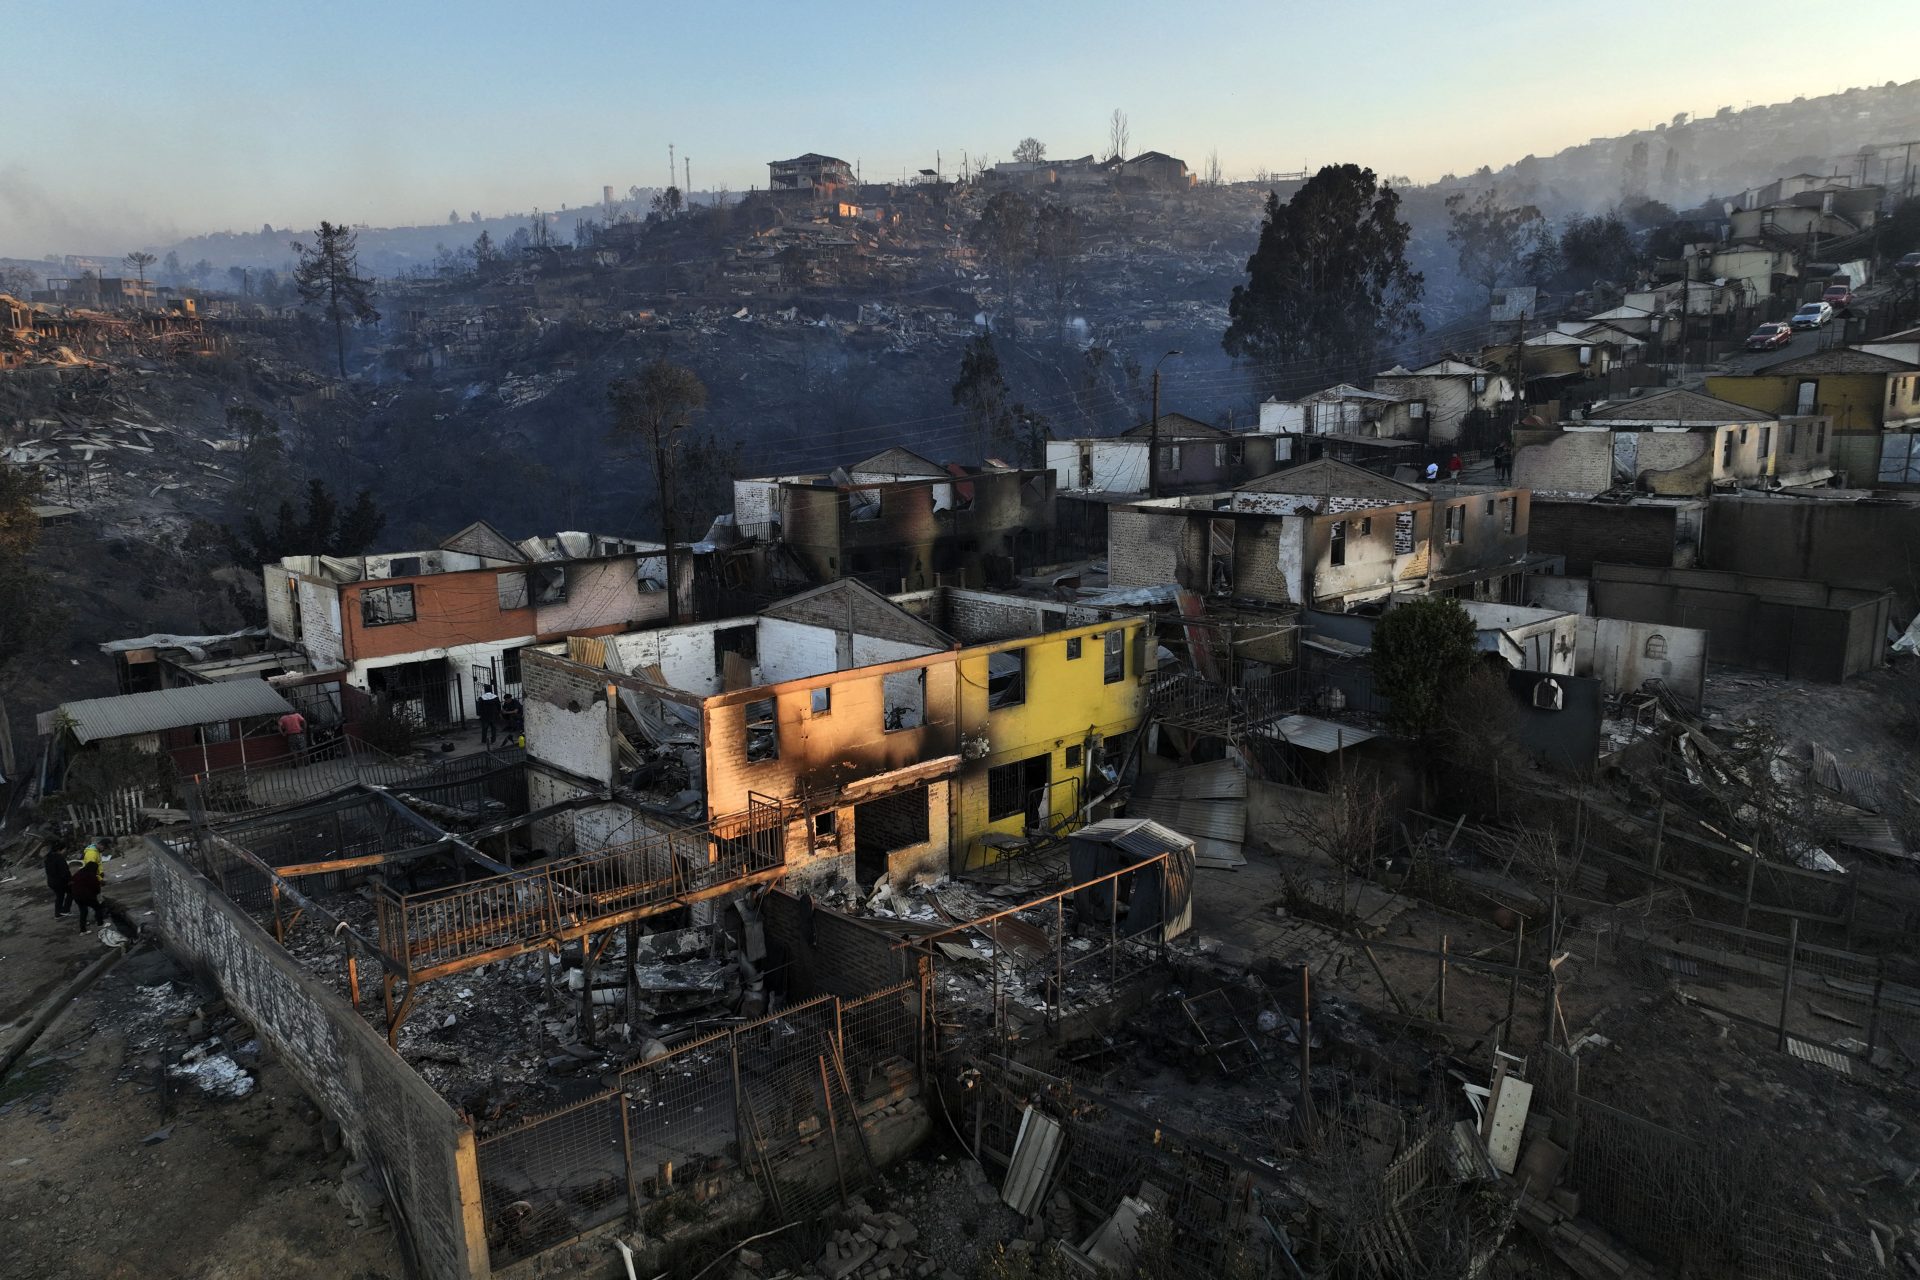 Thousands of houses destroyed by fire